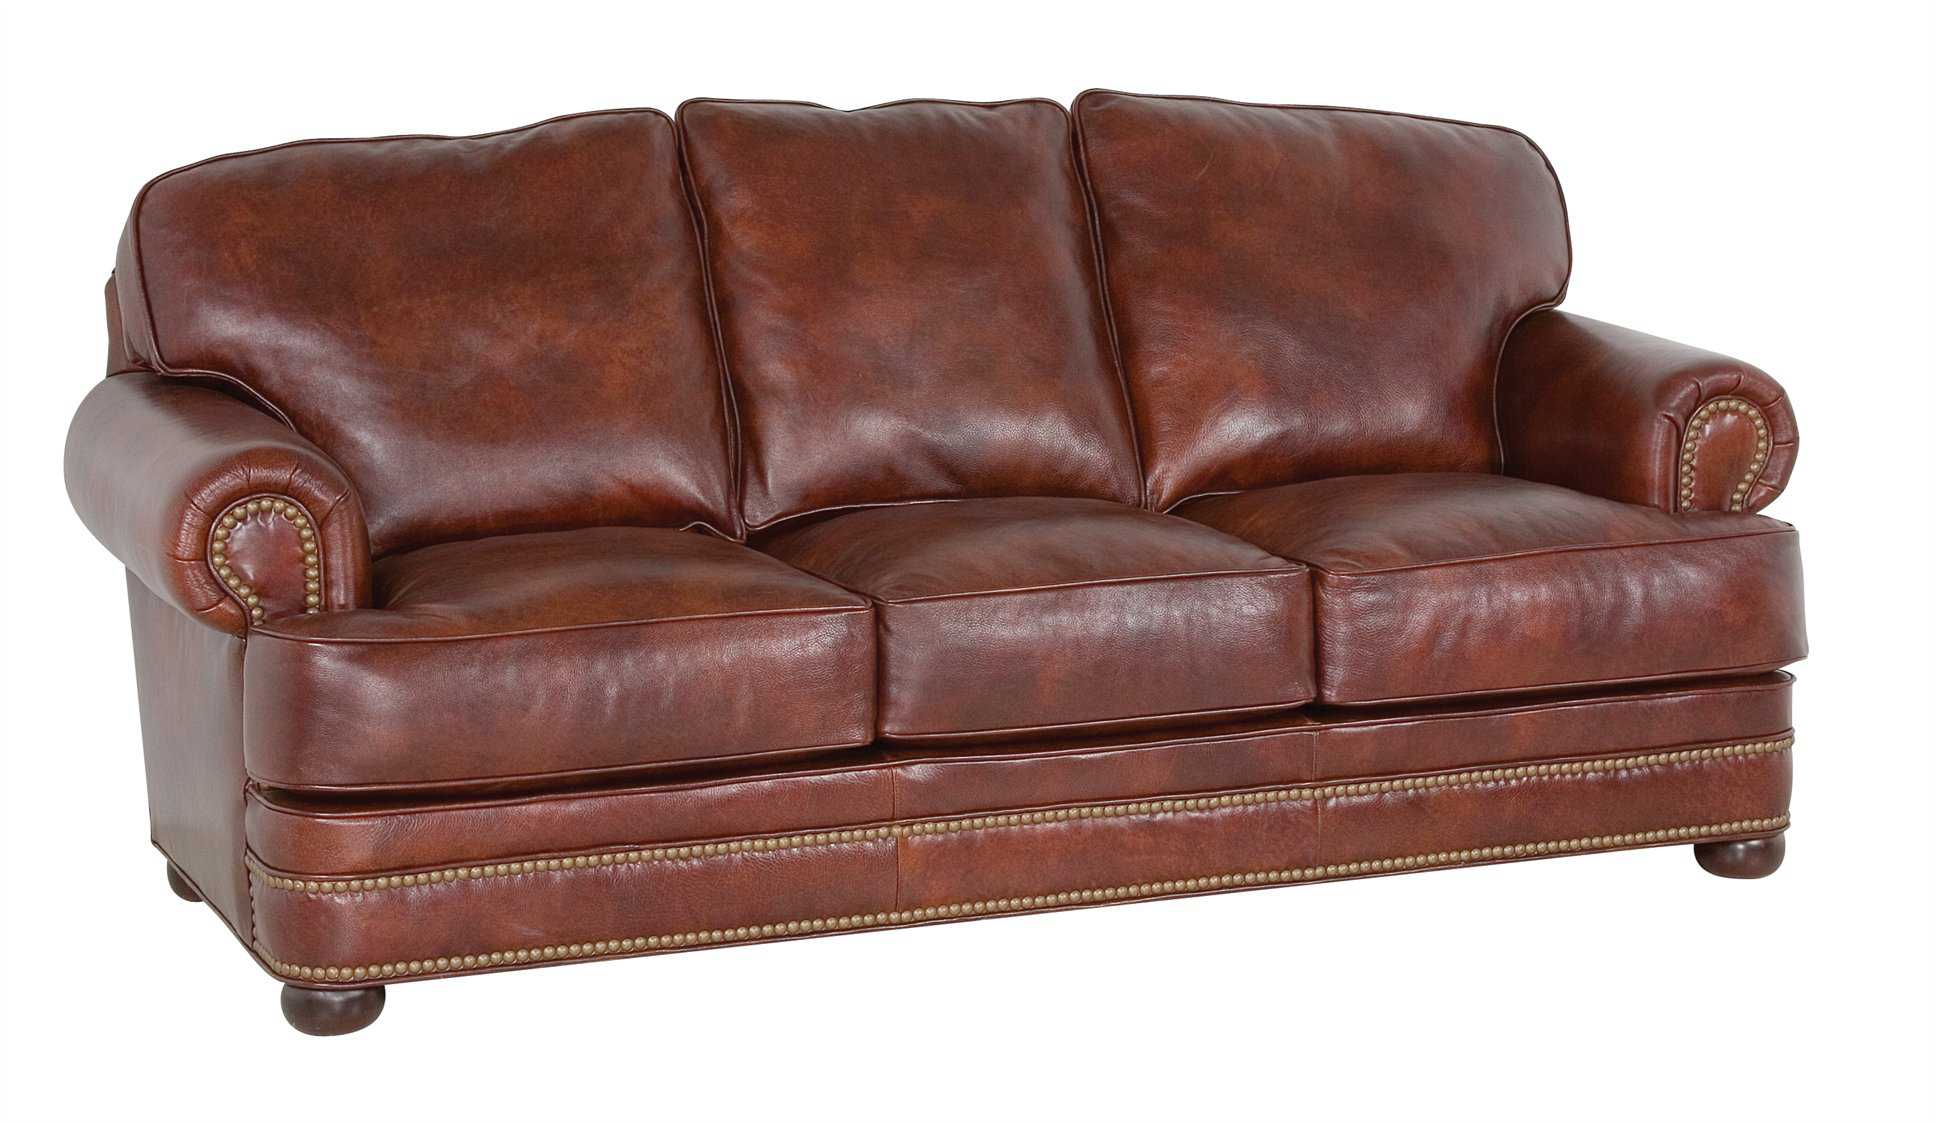 classic traditional brown leather sofa - butler